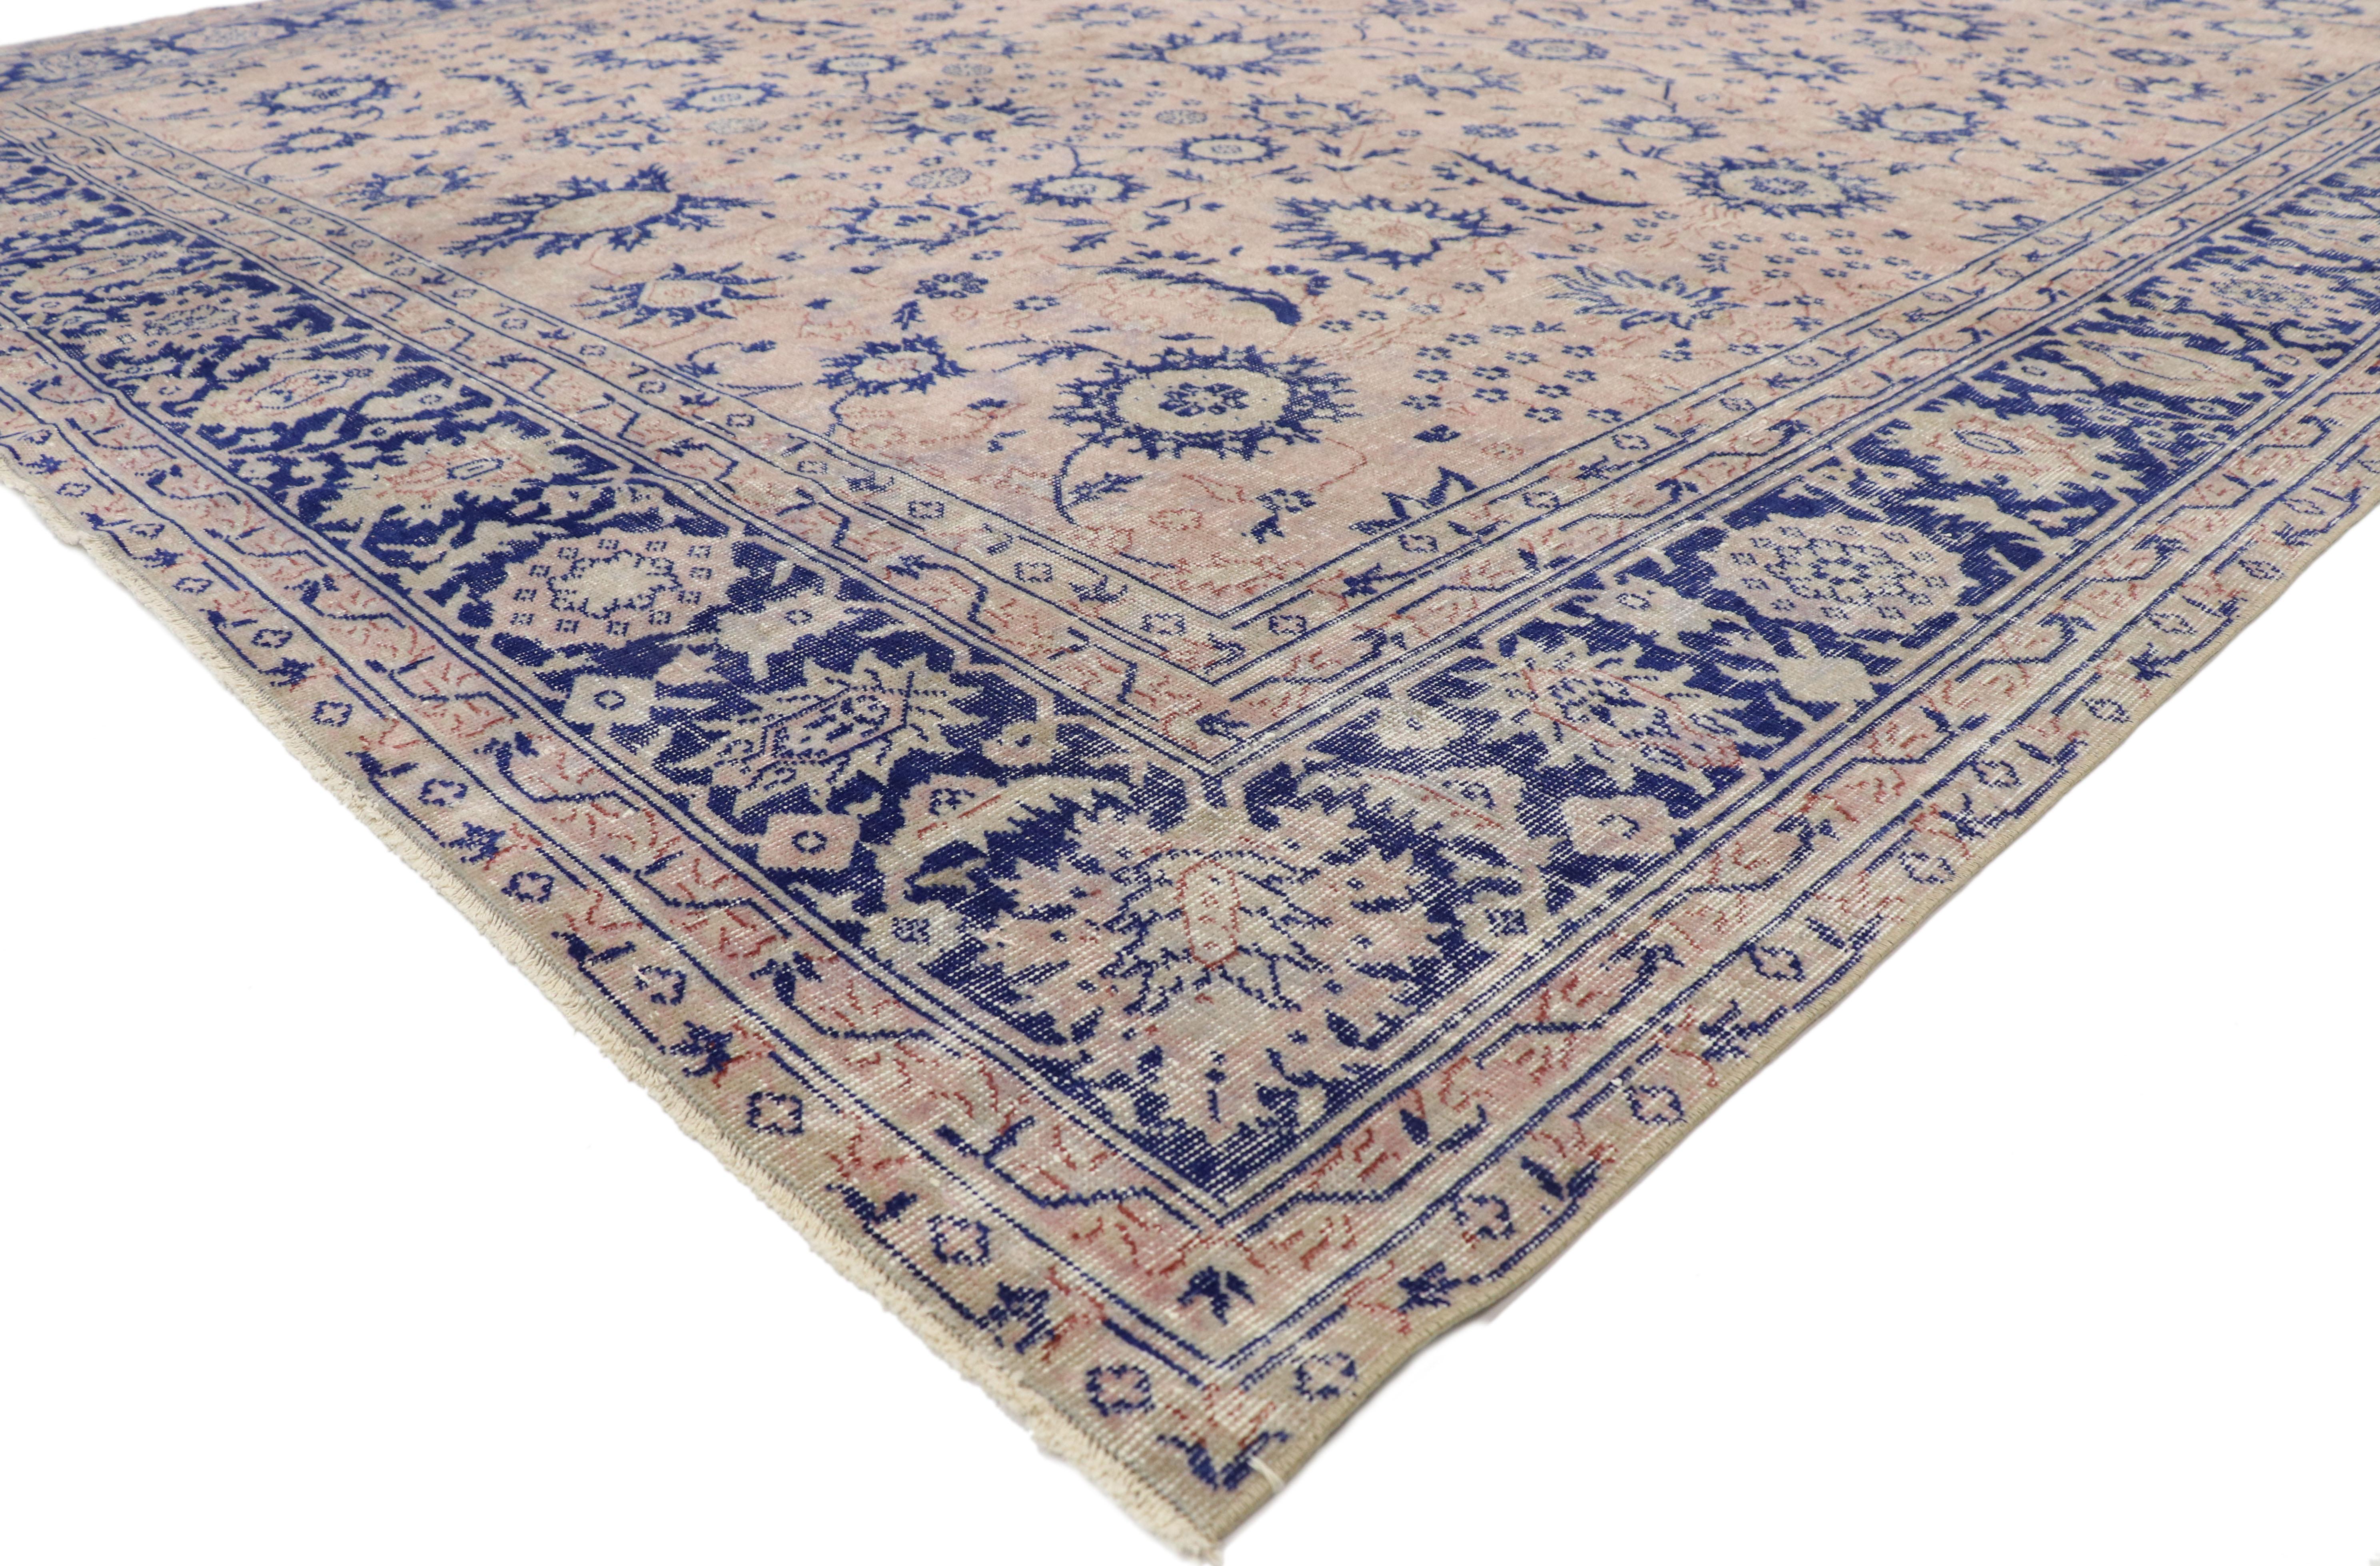 70944, distressed antique Turkish Sparta Palace rug with French Provincial and Georgian style. Bespeaking French cultural influence with an impressive array of realistic floral elements and lovingly timeworn appearance, this hand knotted wool